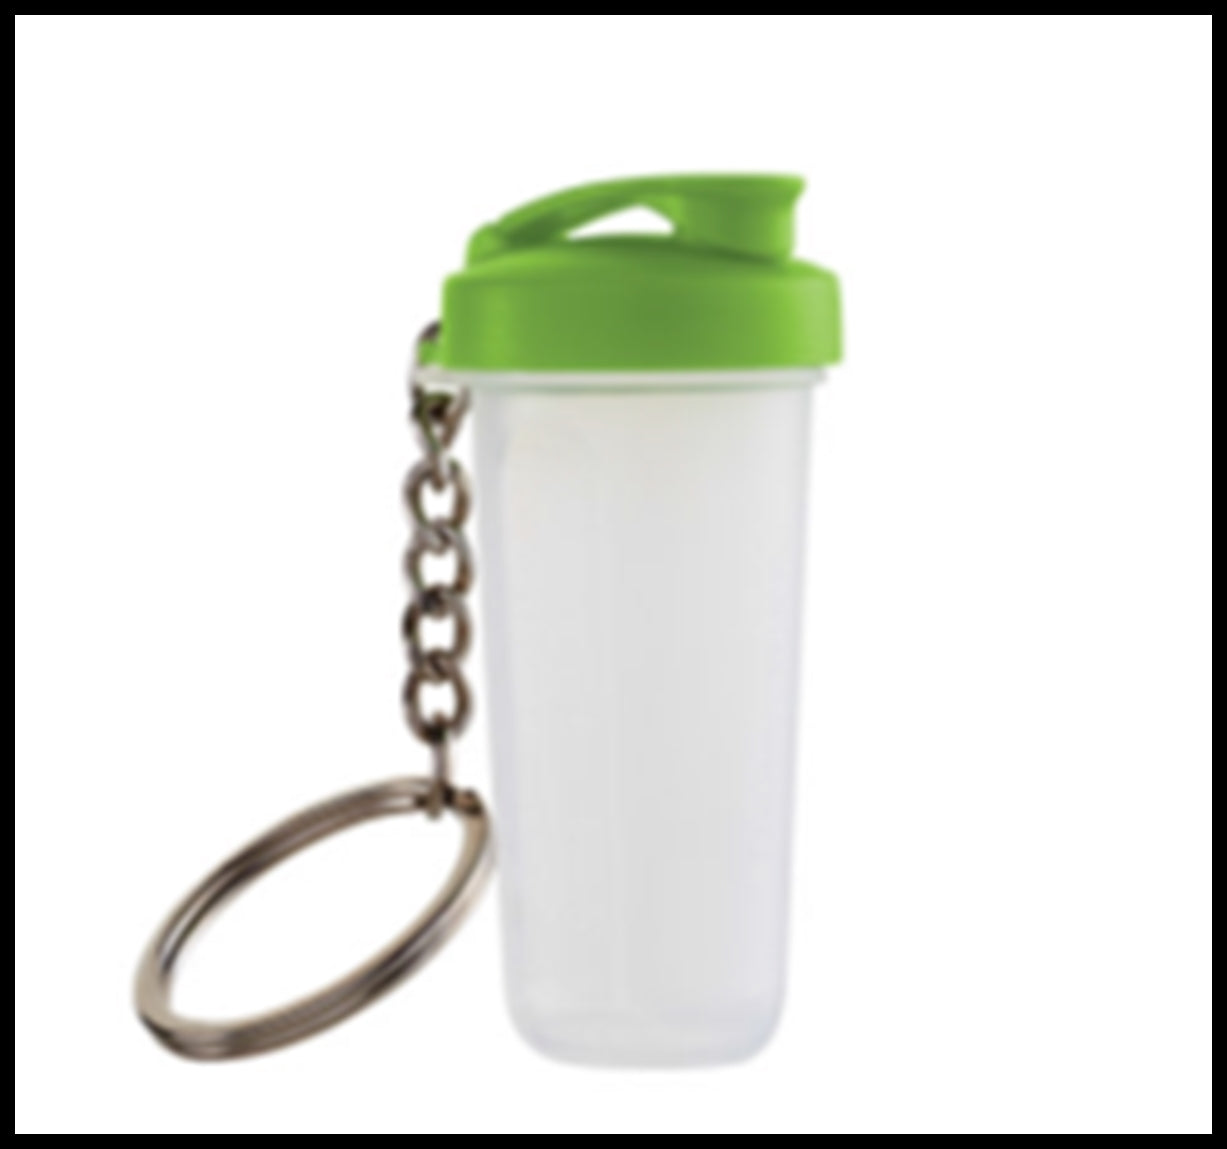 TUPPERWARE New Style Mini Quick Shake Container Key Chain Kiwi Lime Green - Plastic Glass and Wax ~ PGW